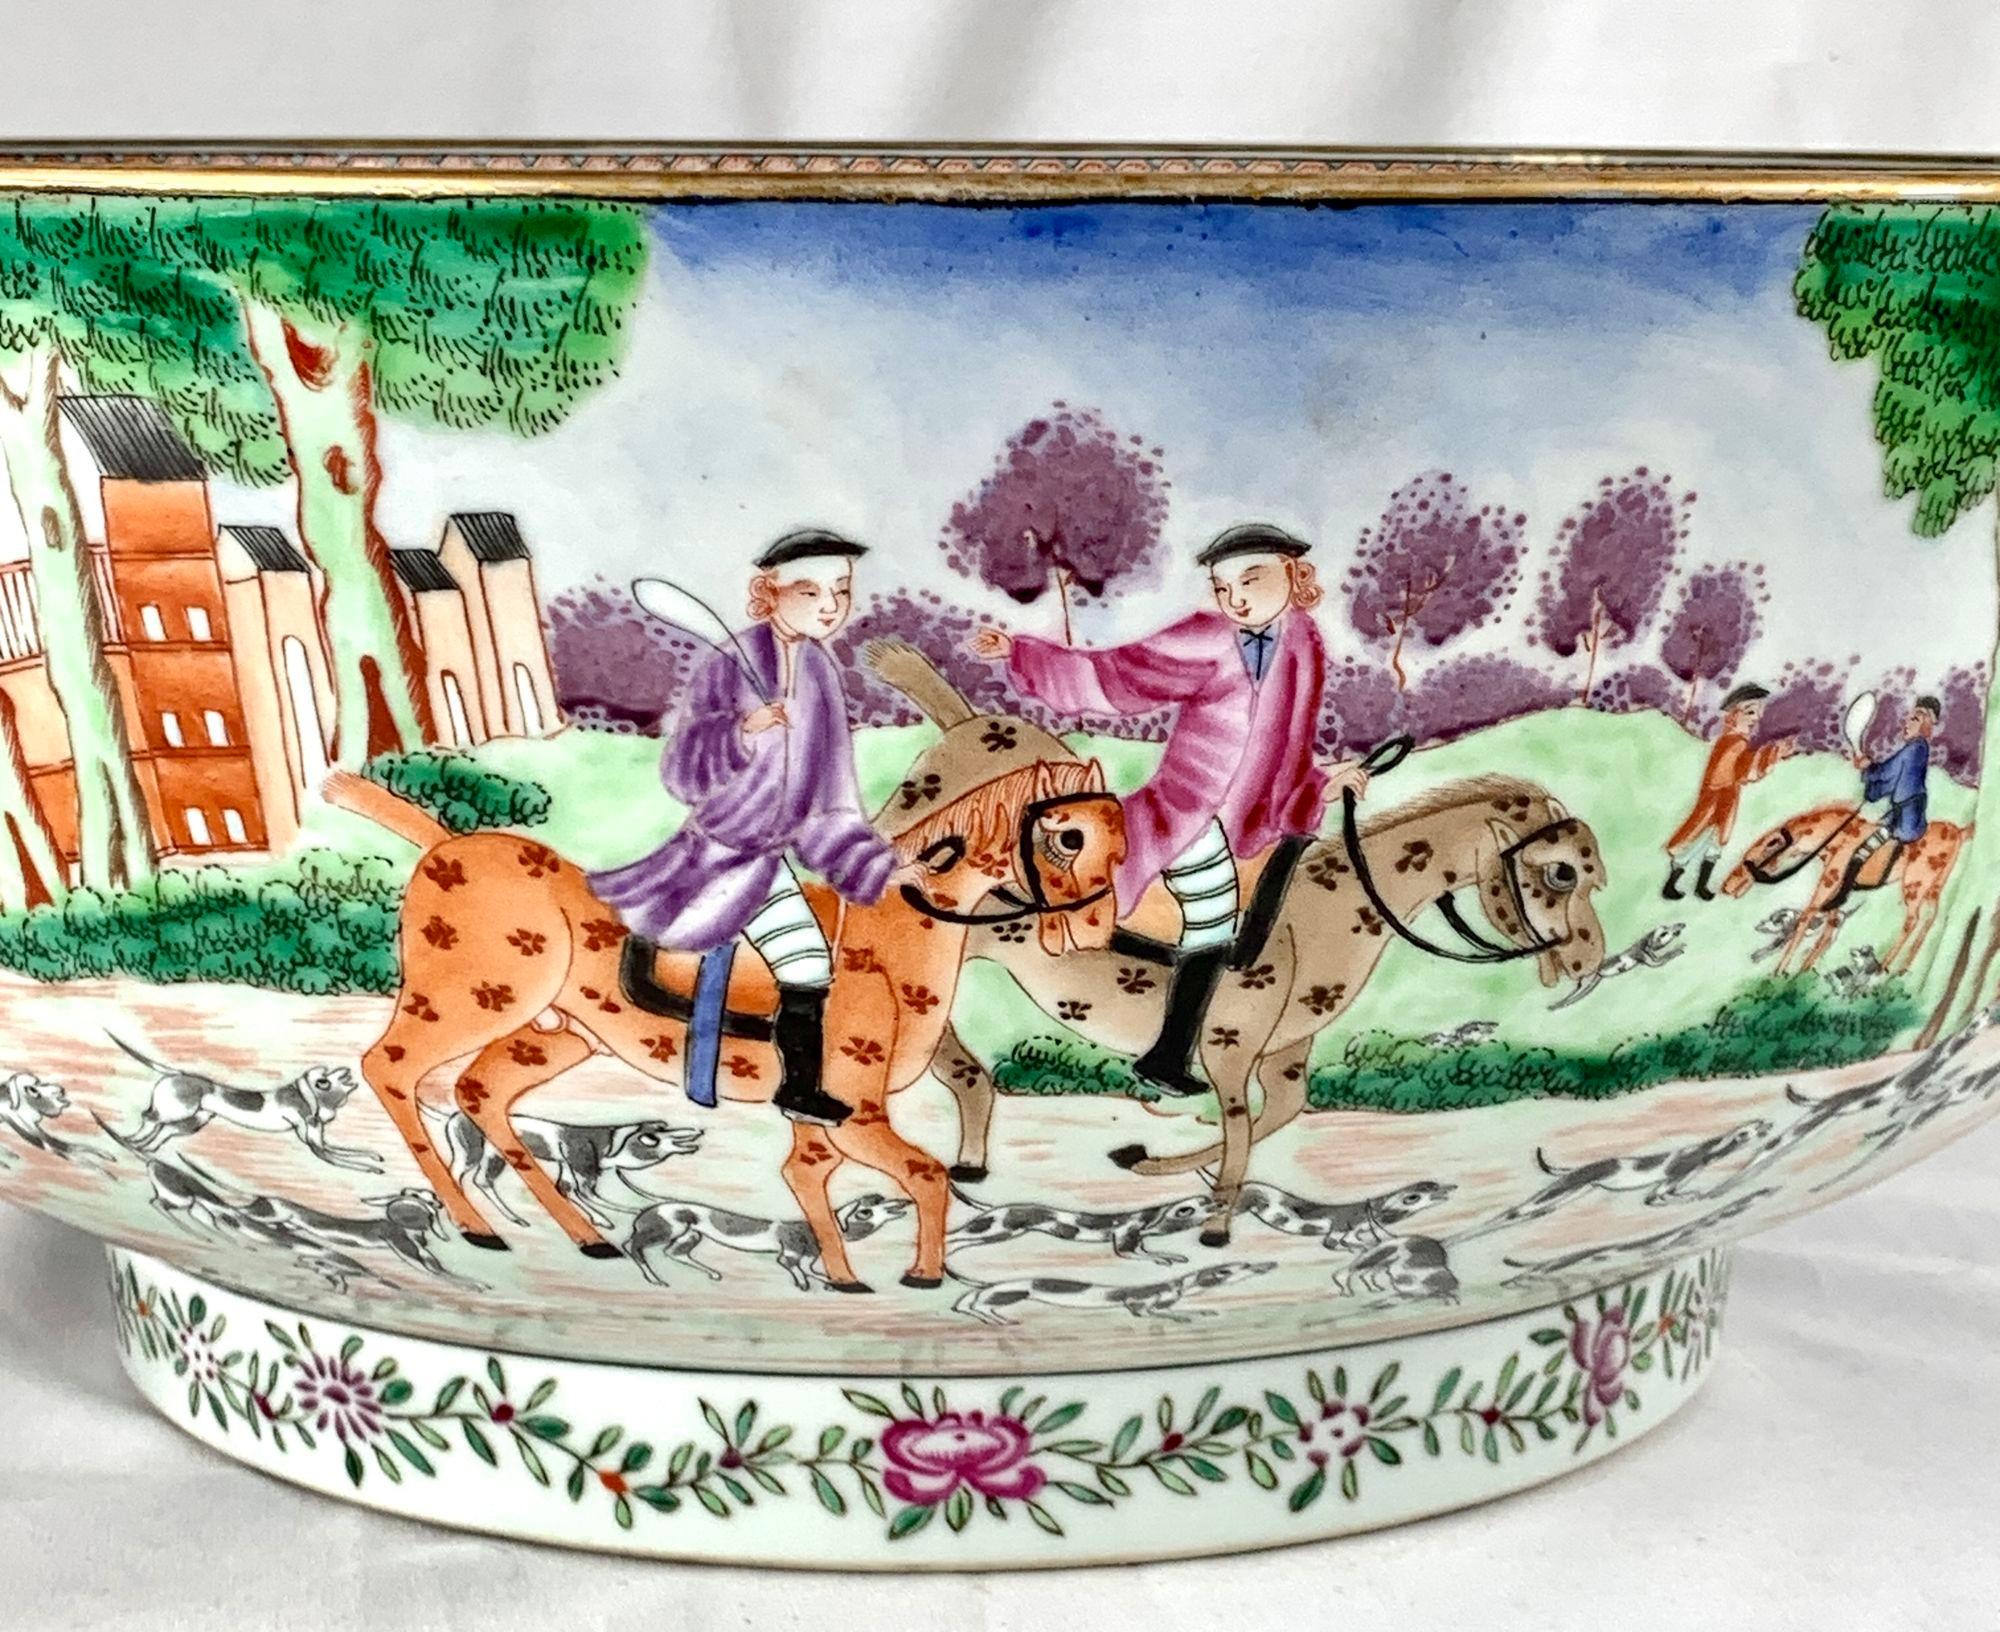 The Chinese hunt bowl at its finest!
Made in the Qianlong period, circa 1770, this exquisite hand-painted Chinese export bowl shows Western figures riding to the hunt in a lush green landscape.
The bowl captures the viewer's eyes with its rich